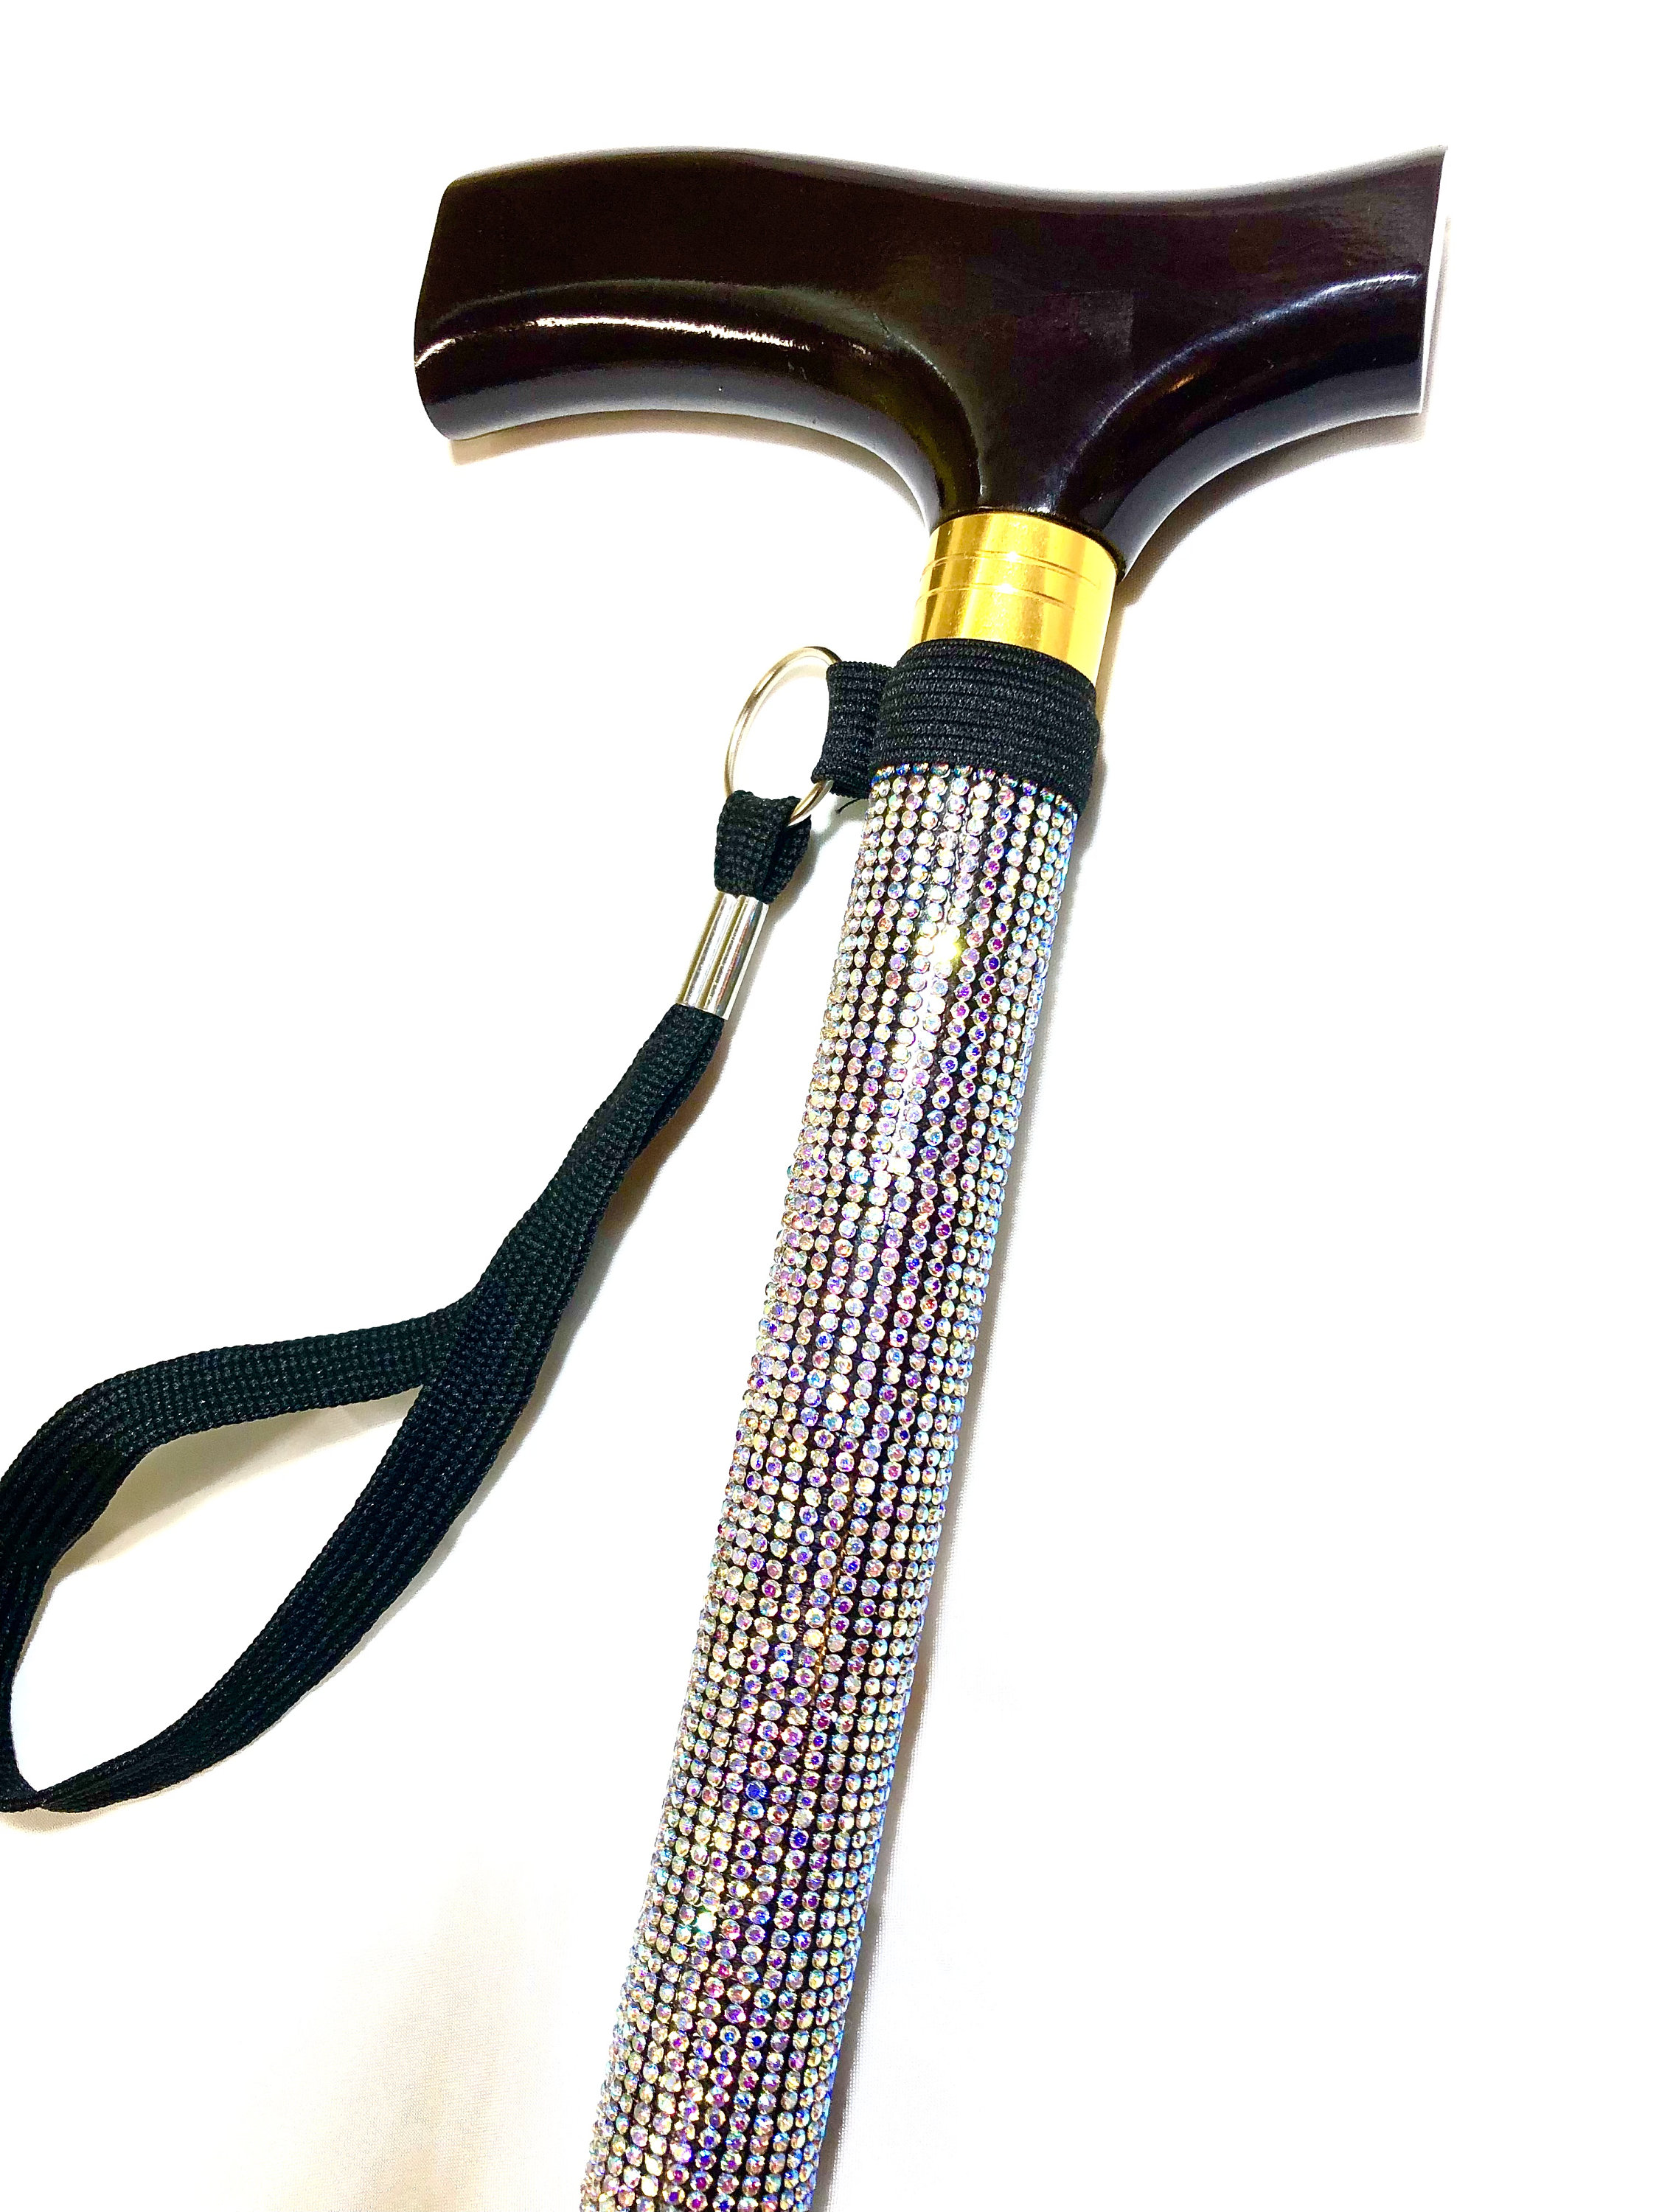 Rhinestone Bling Walking Stick, Perfect Accessory for Hiking or